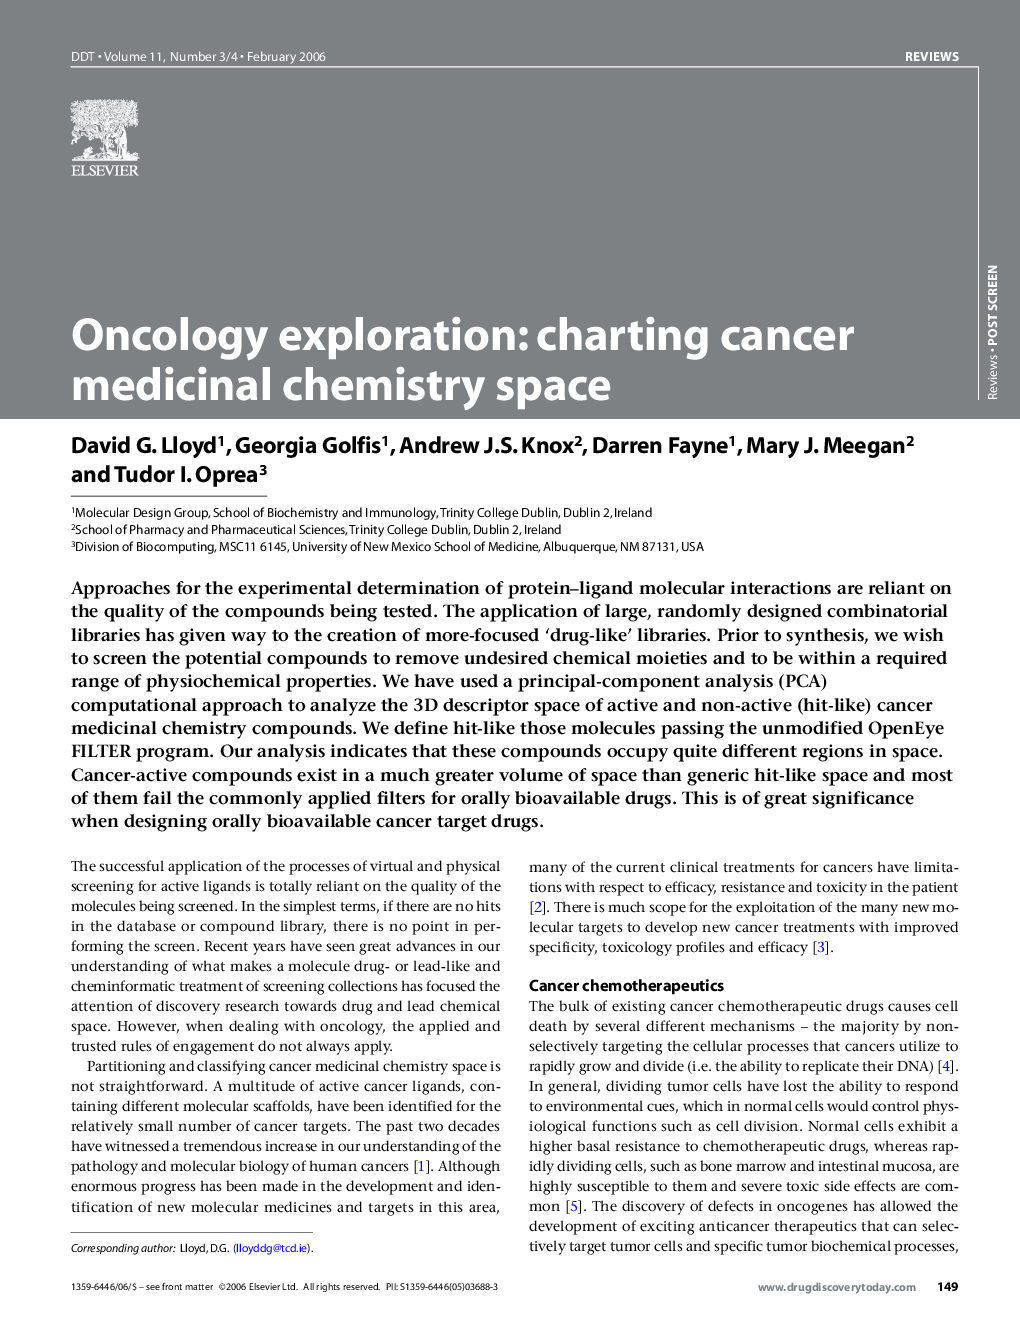 Oncology exploration: charting cancer medicinal chemistry space